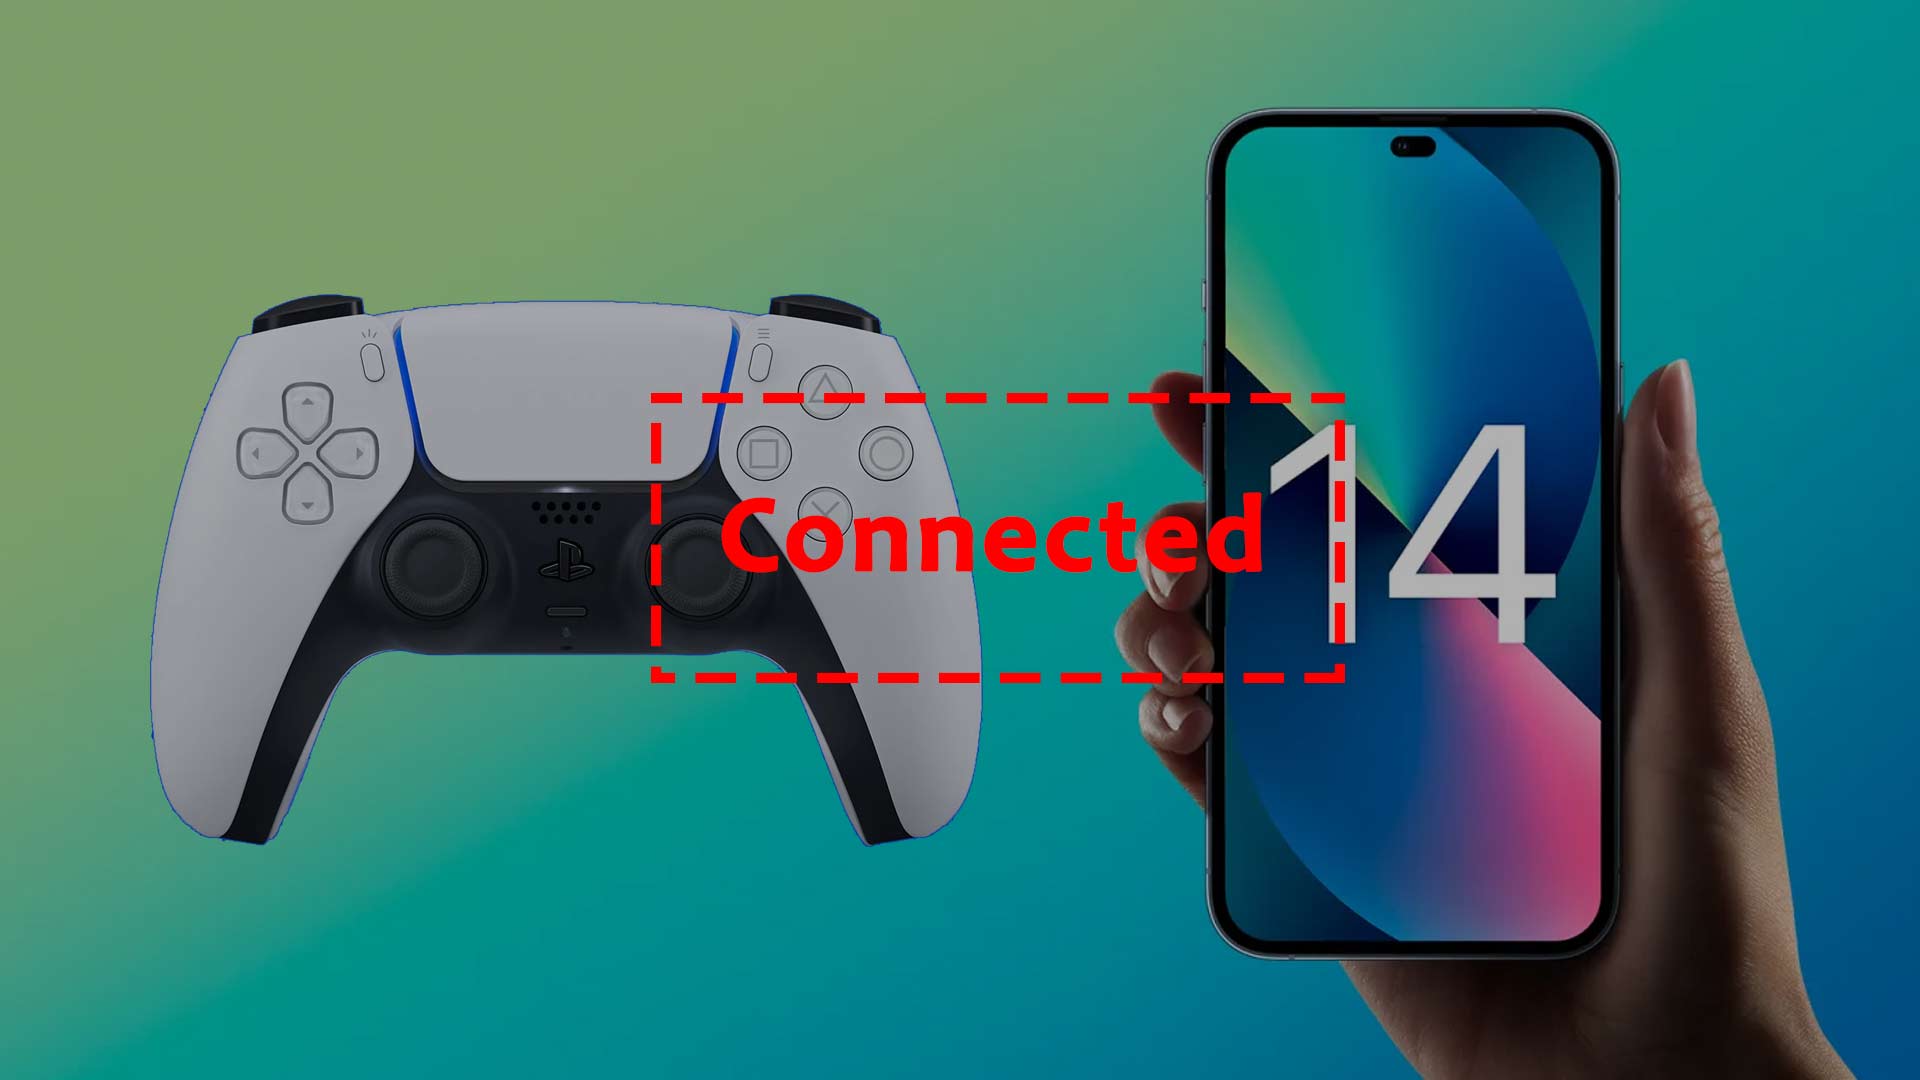 How to connect ps5 controller to iPhone